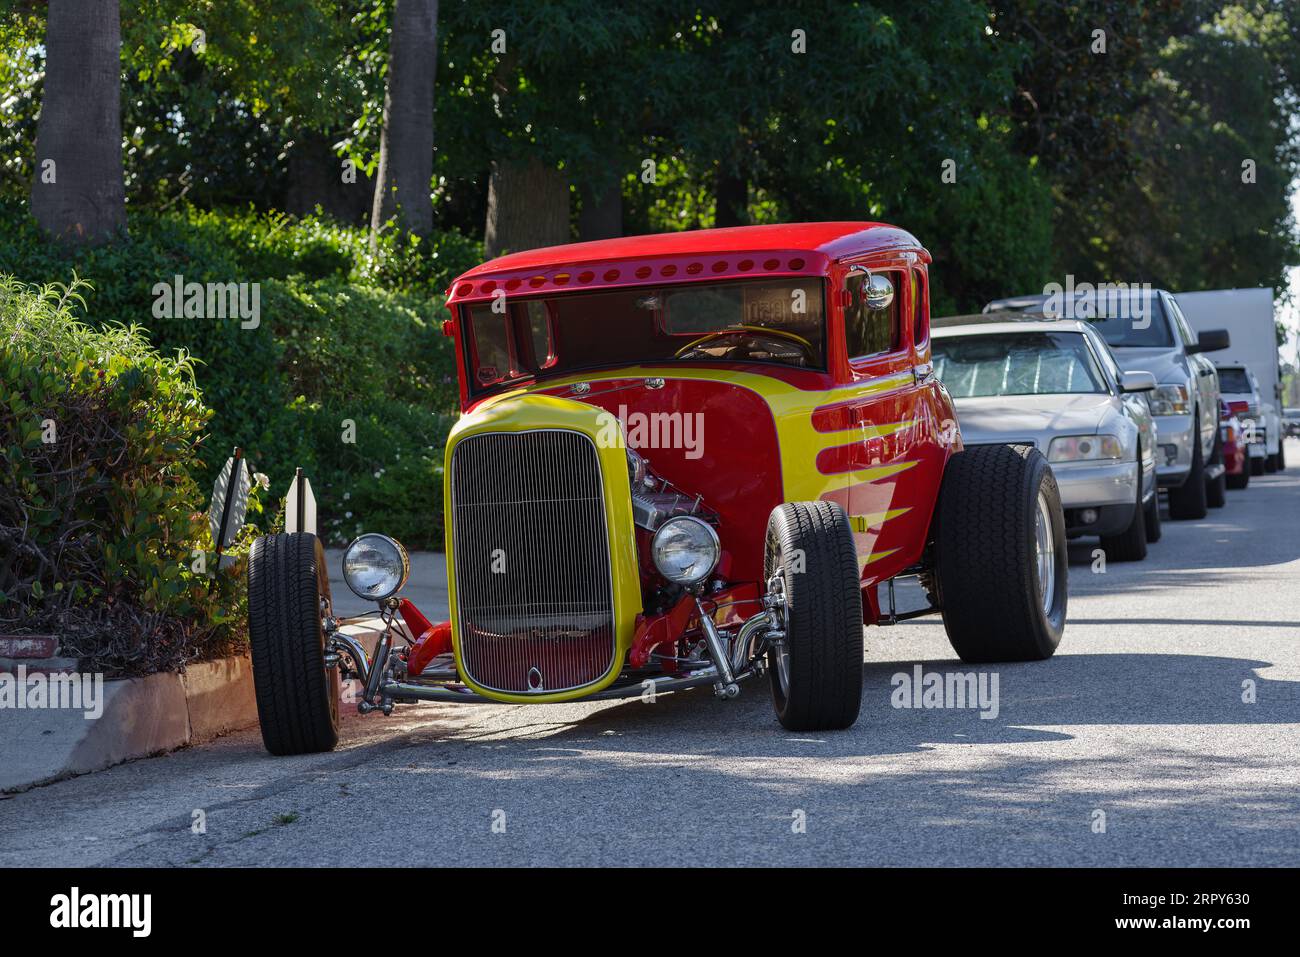 Hot Rod car shown parked in a residential. Stock Photo